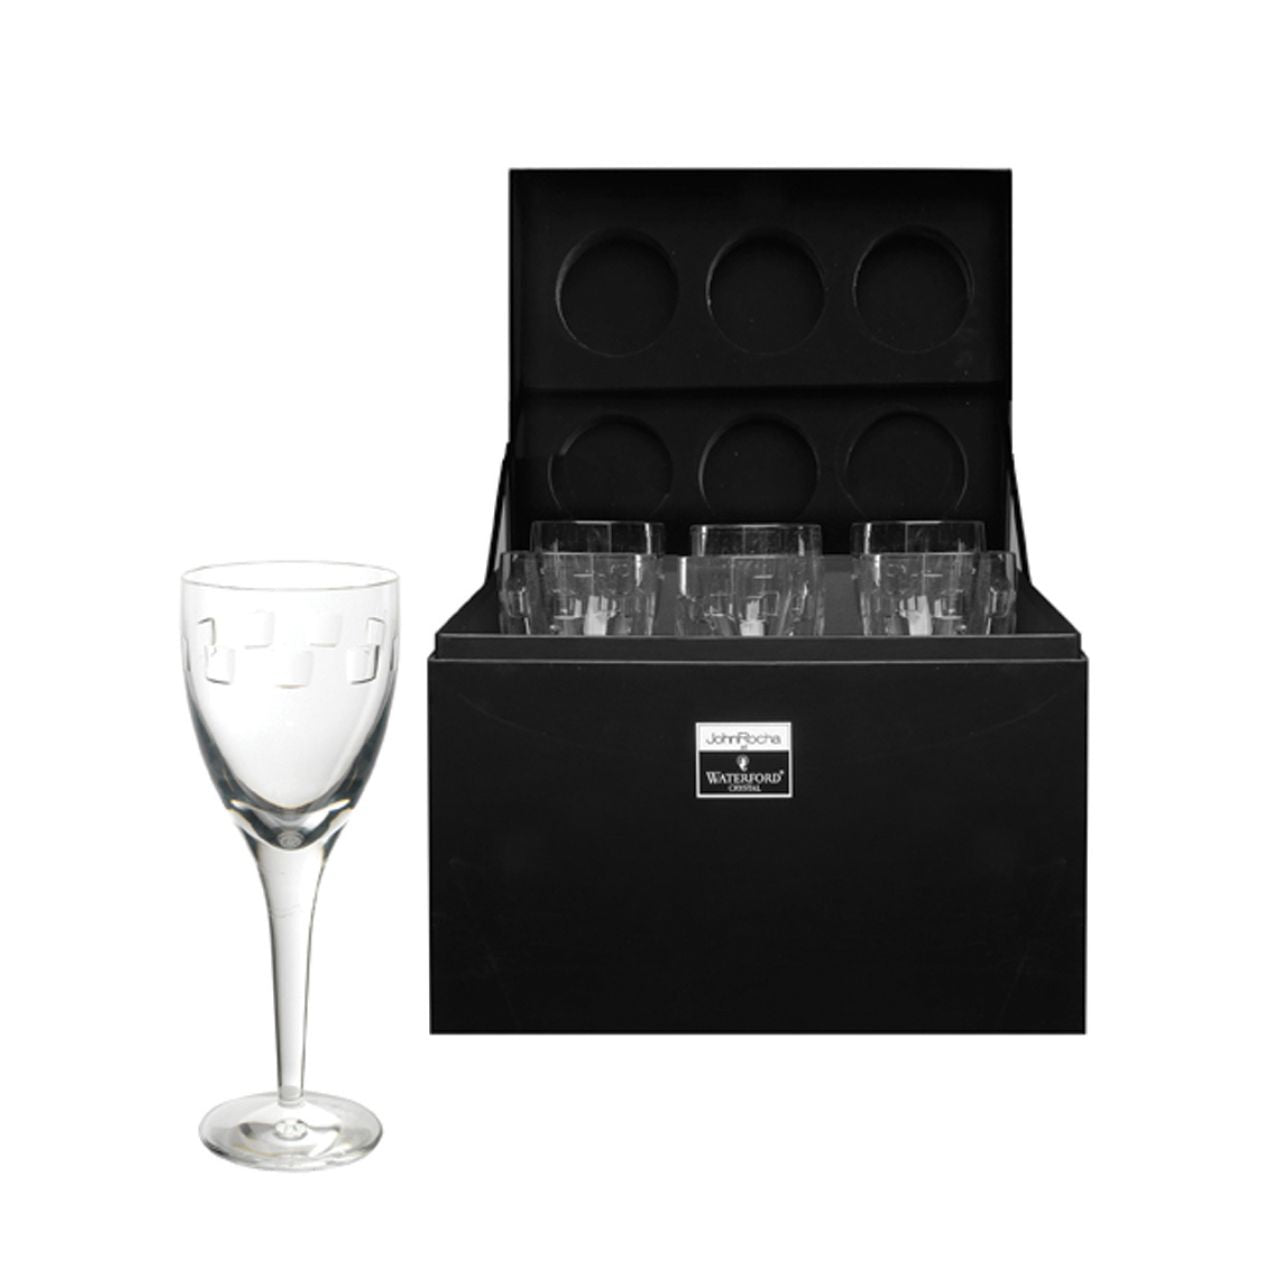 Waterford Crystal John Rocha Geo Red Wine Presentation Box Set of 6  John Rocha Geo Red Wine glasses for Waterford. Featuring a dynamic geometric motif on brilliant crystal, John Rocha's Geo collection epitomises his design style, evoking simple elegance and a contemporary vision.  This John Rocha Geo Red Wine from Waterford is a stylish addition to your dining collection. Made from a sparkling clear crystal, Red Wines are designed in a contemporary style and finished with geometric cutting along the rim.